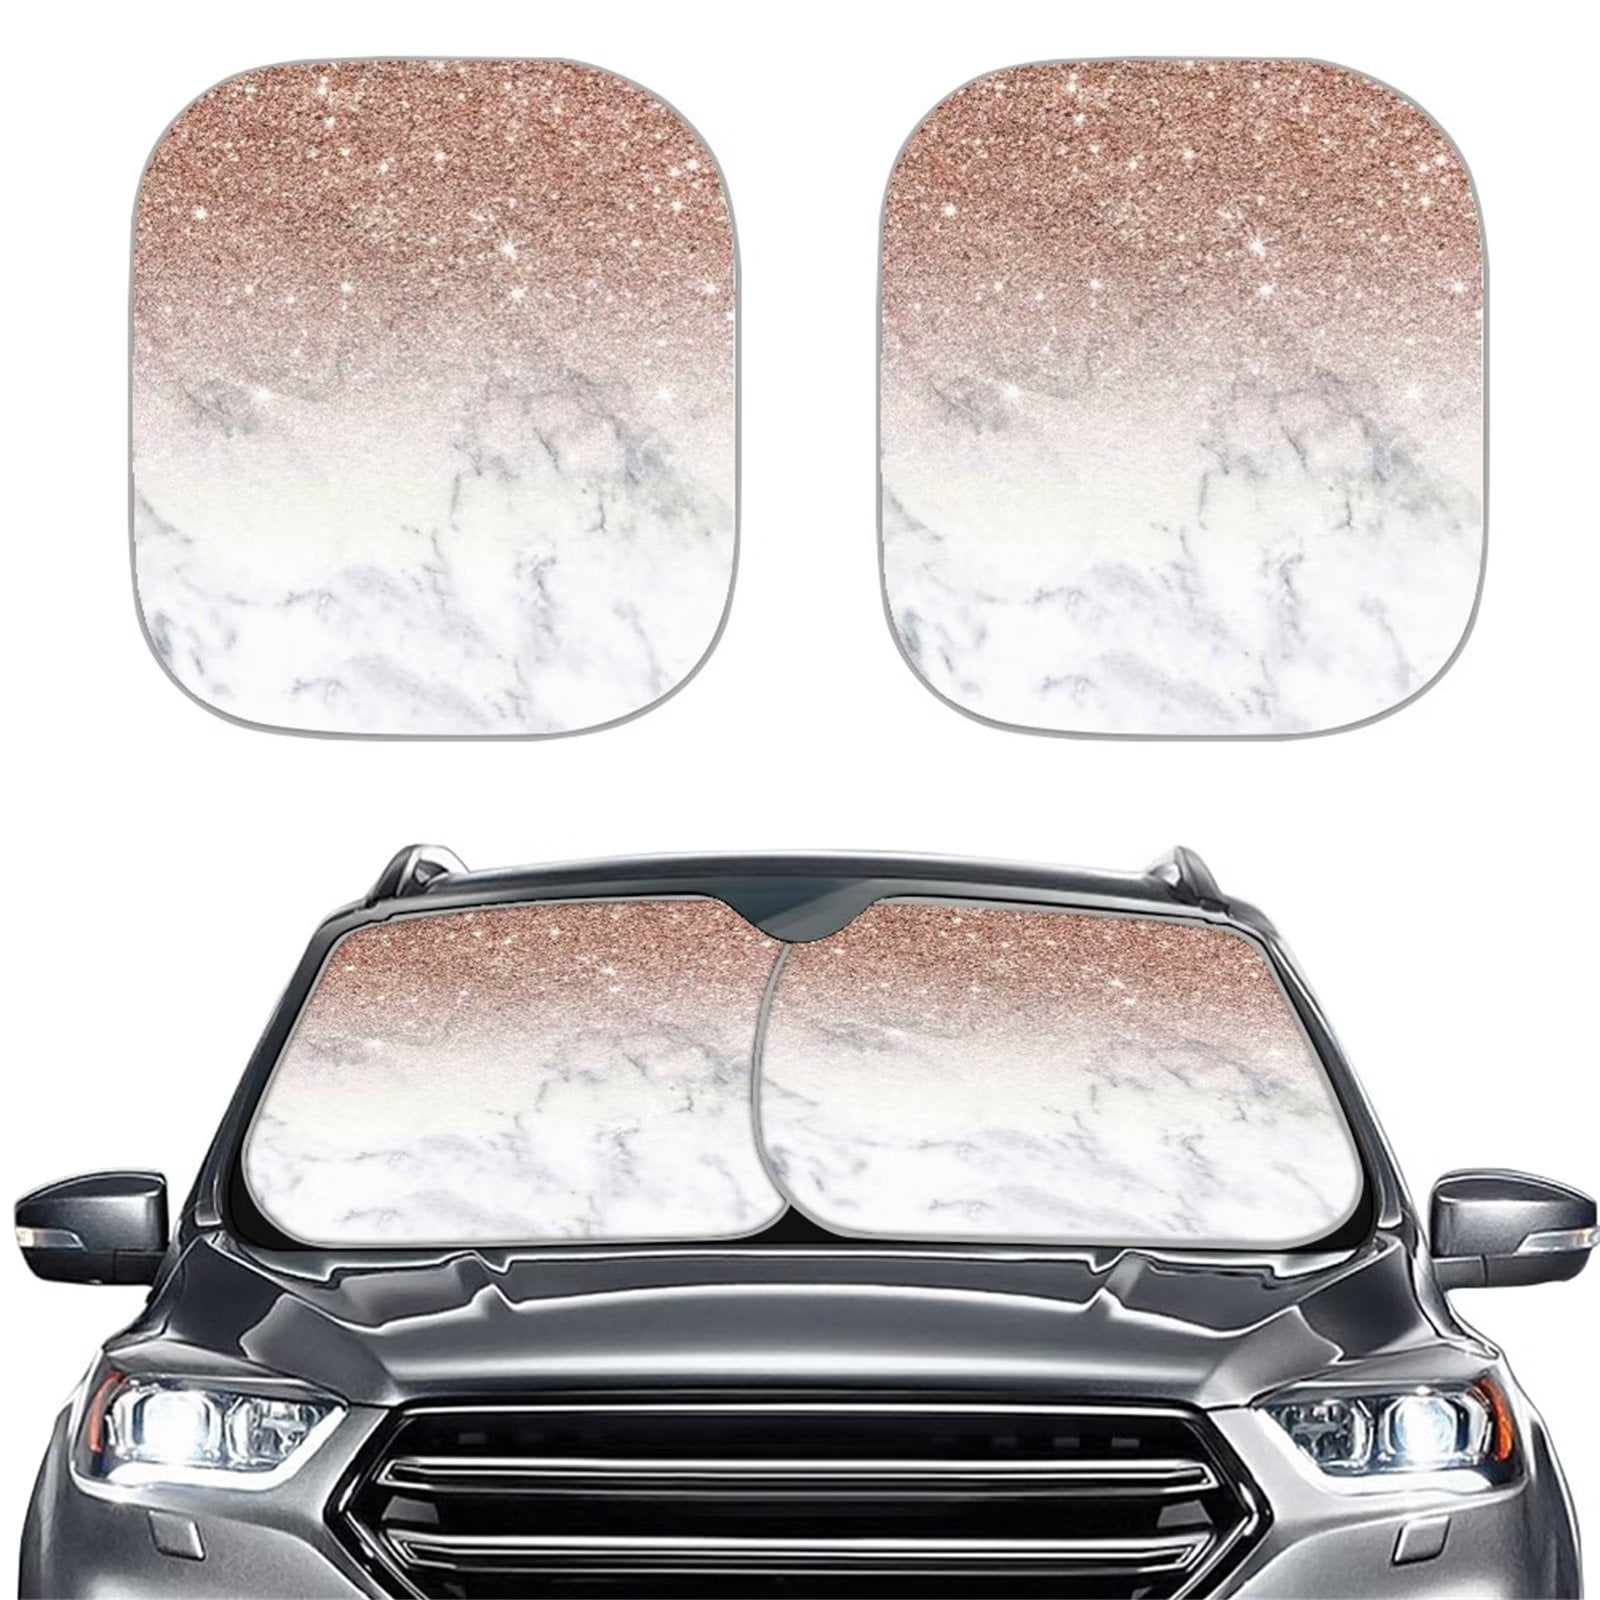  White Pink Ribbon Car Windshield Sun Shade with Steel